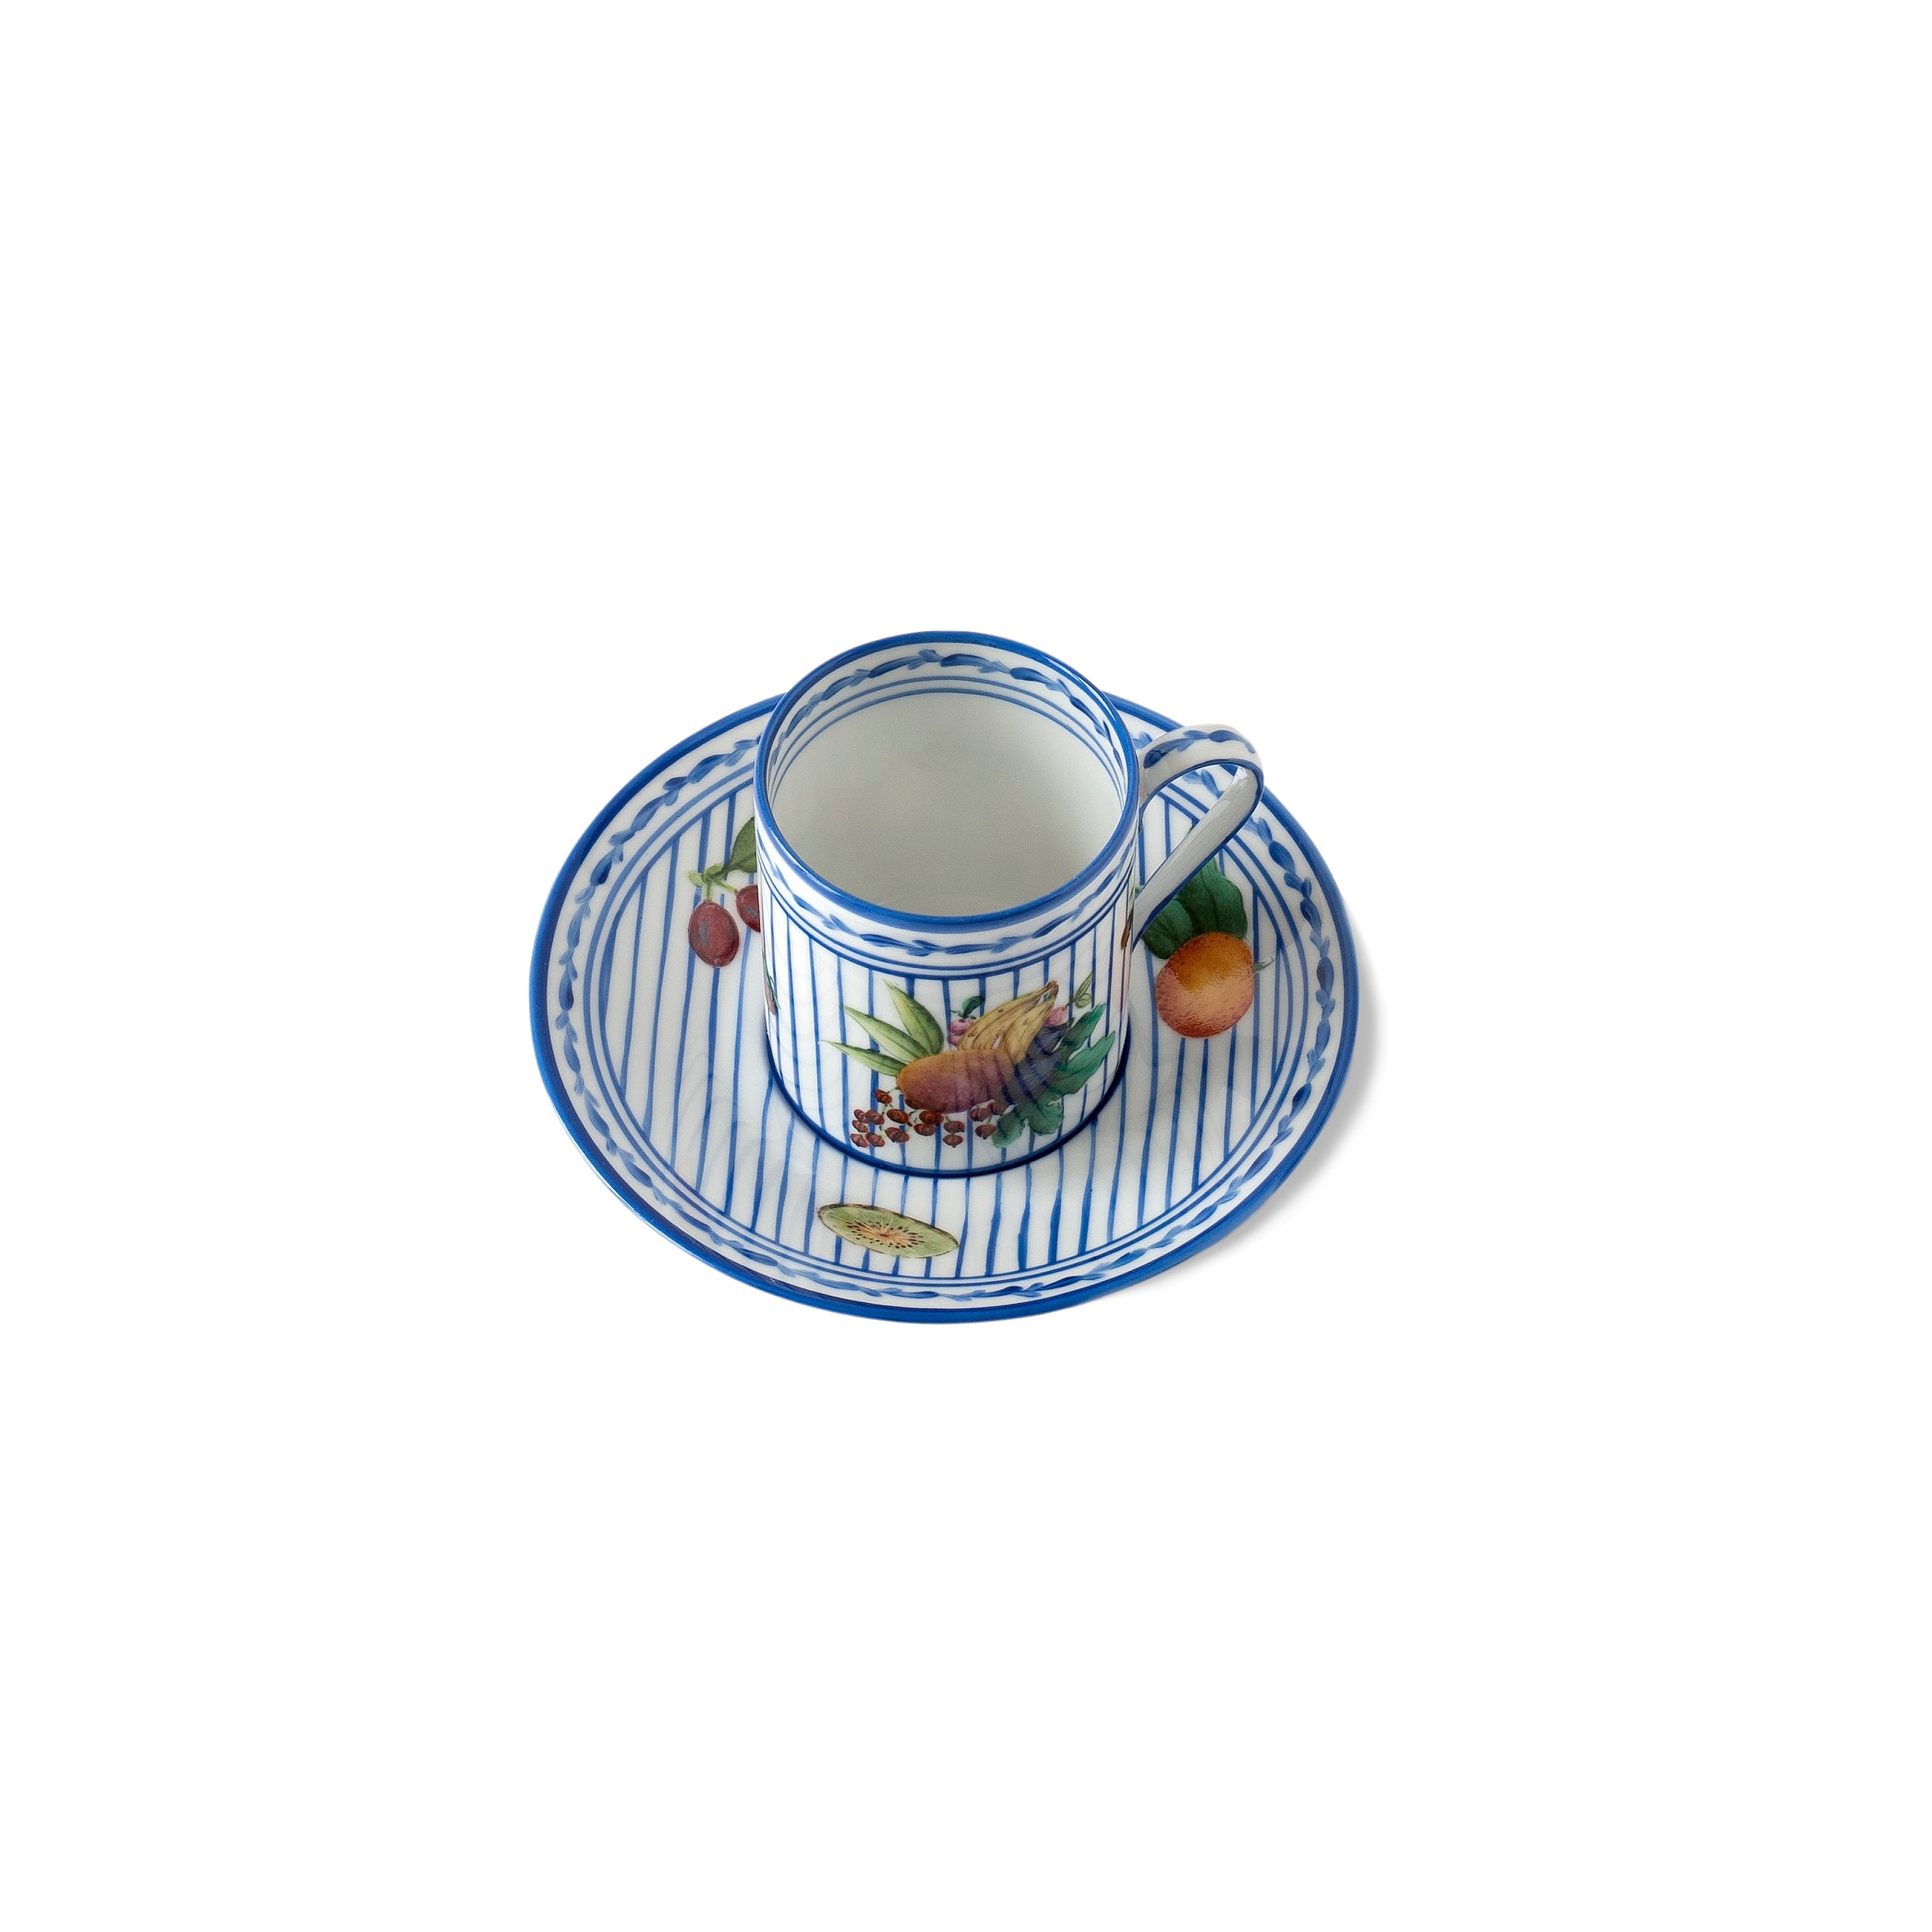 Potager in Blue - Coffee cup and saucer
